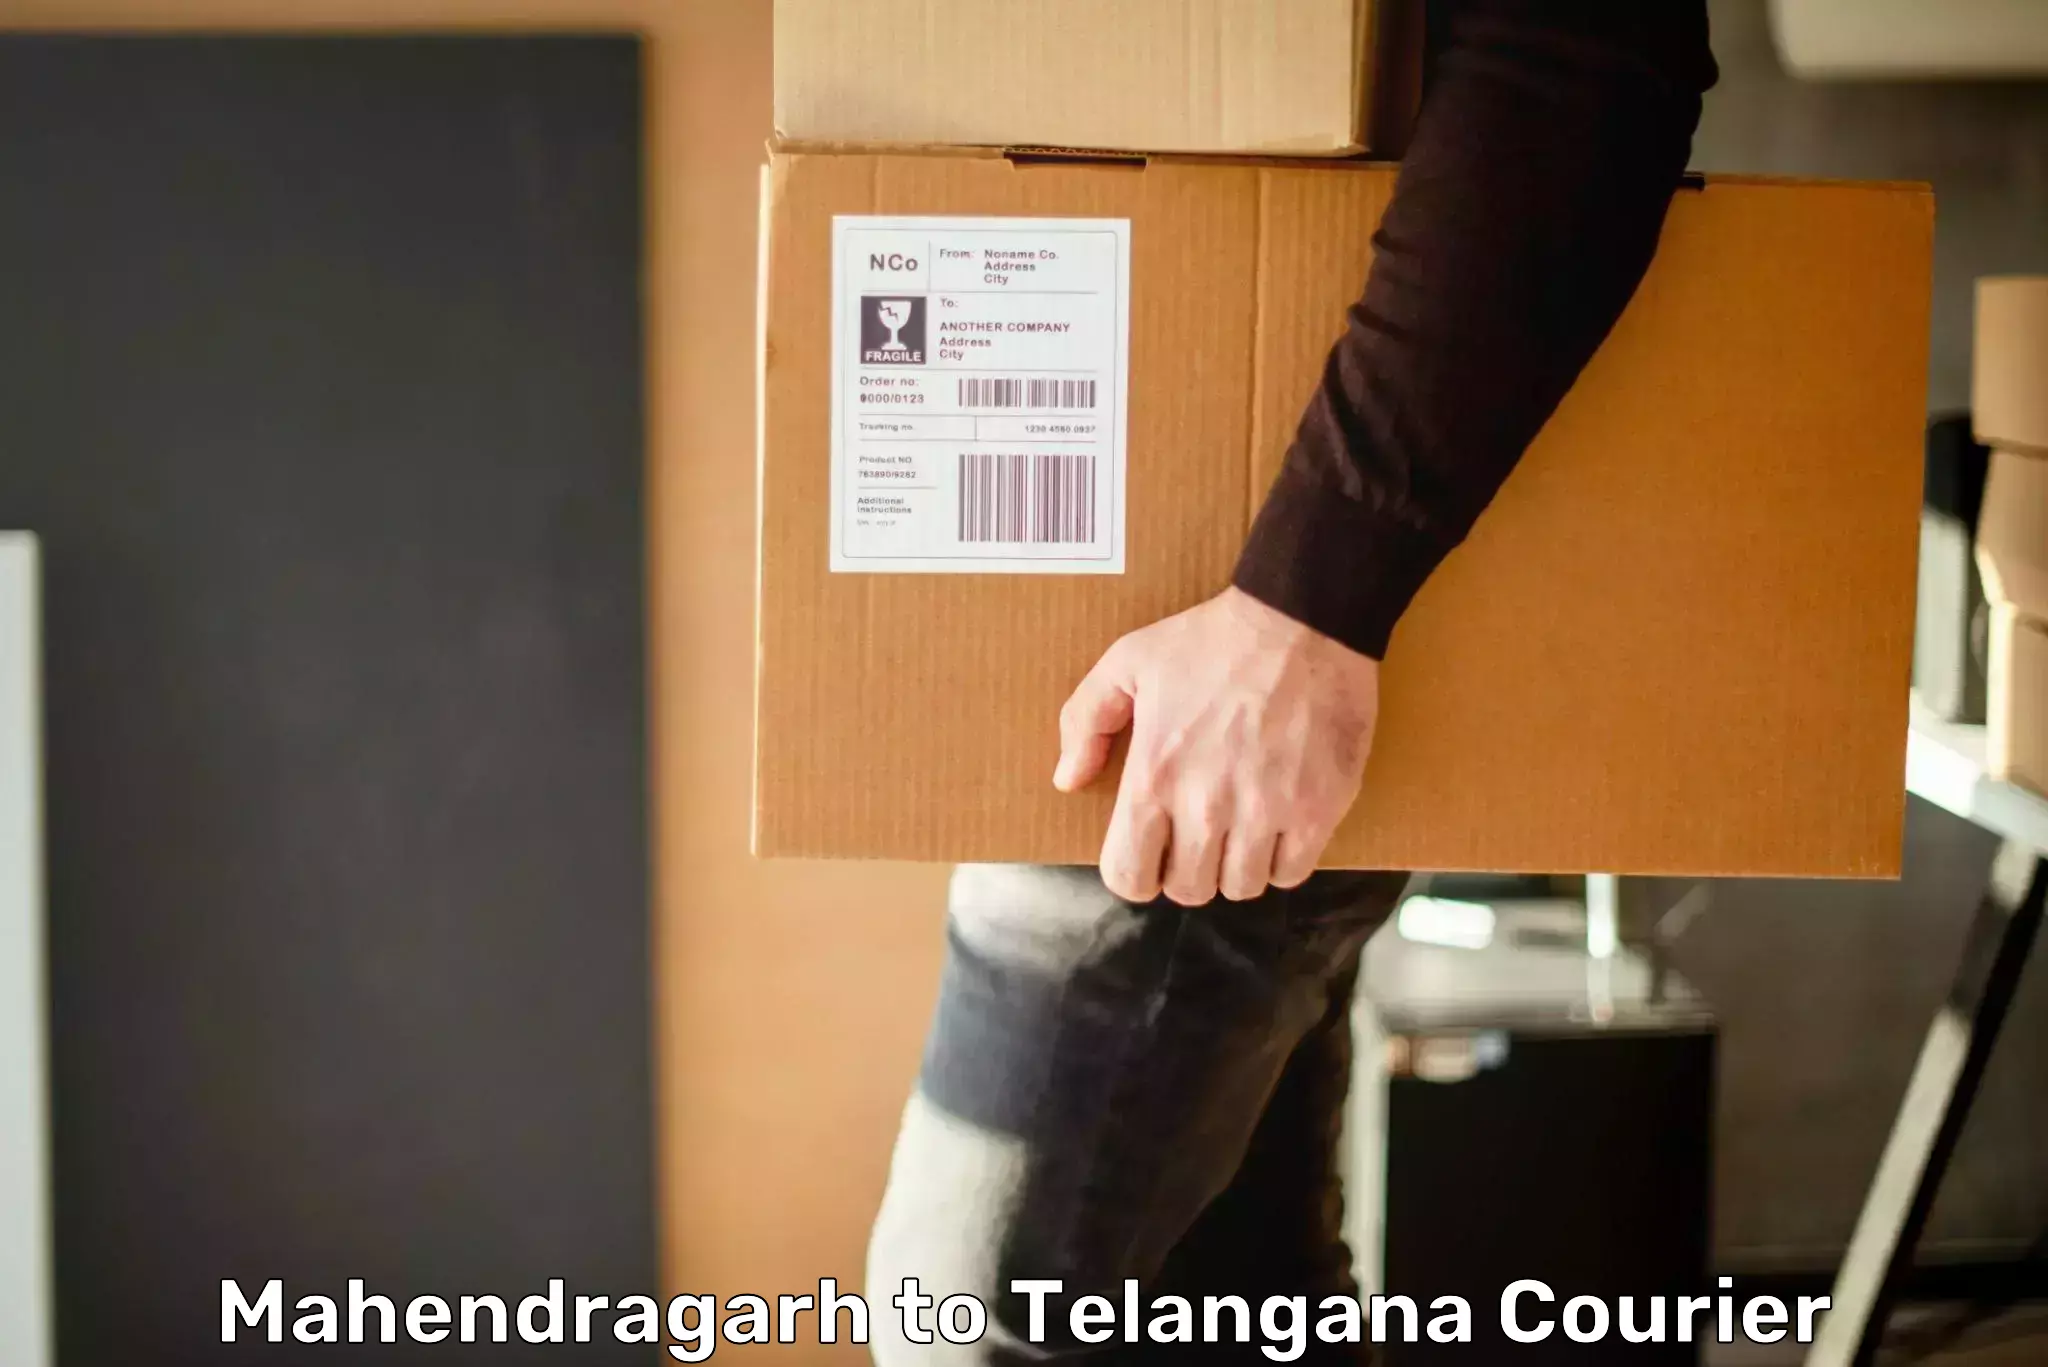 Business delivery service Mahendragarh to Telangana